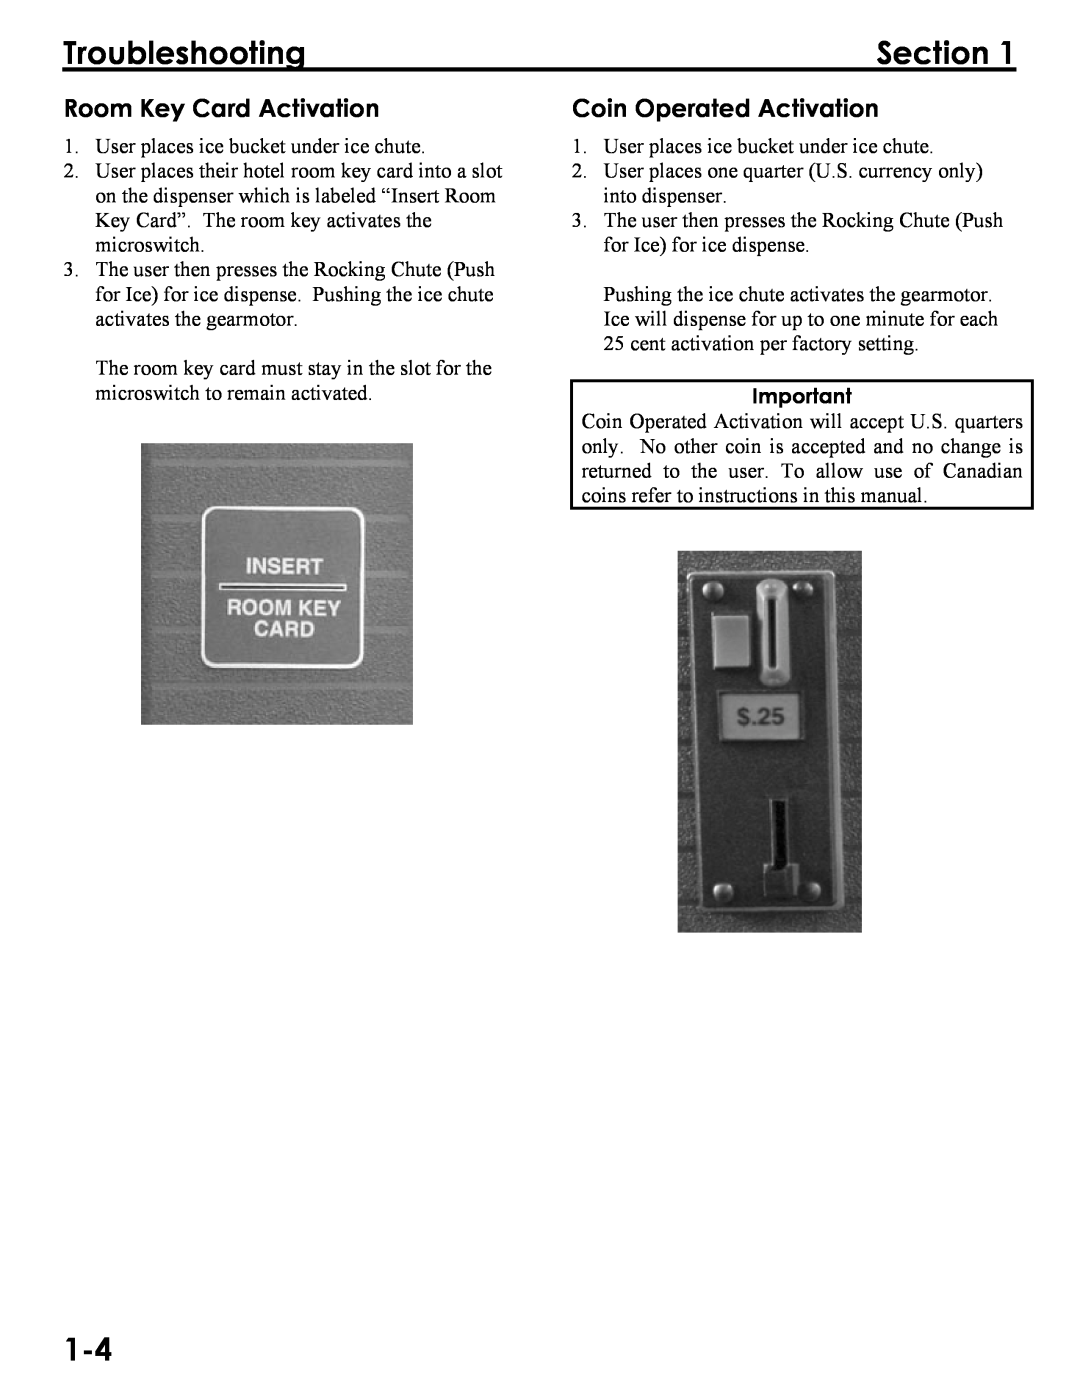 Manitowoc Ice Q300, Q290, Q160 service manual Room Key Card Activation, Coin Operated Activation, Troubleshooting, Section 